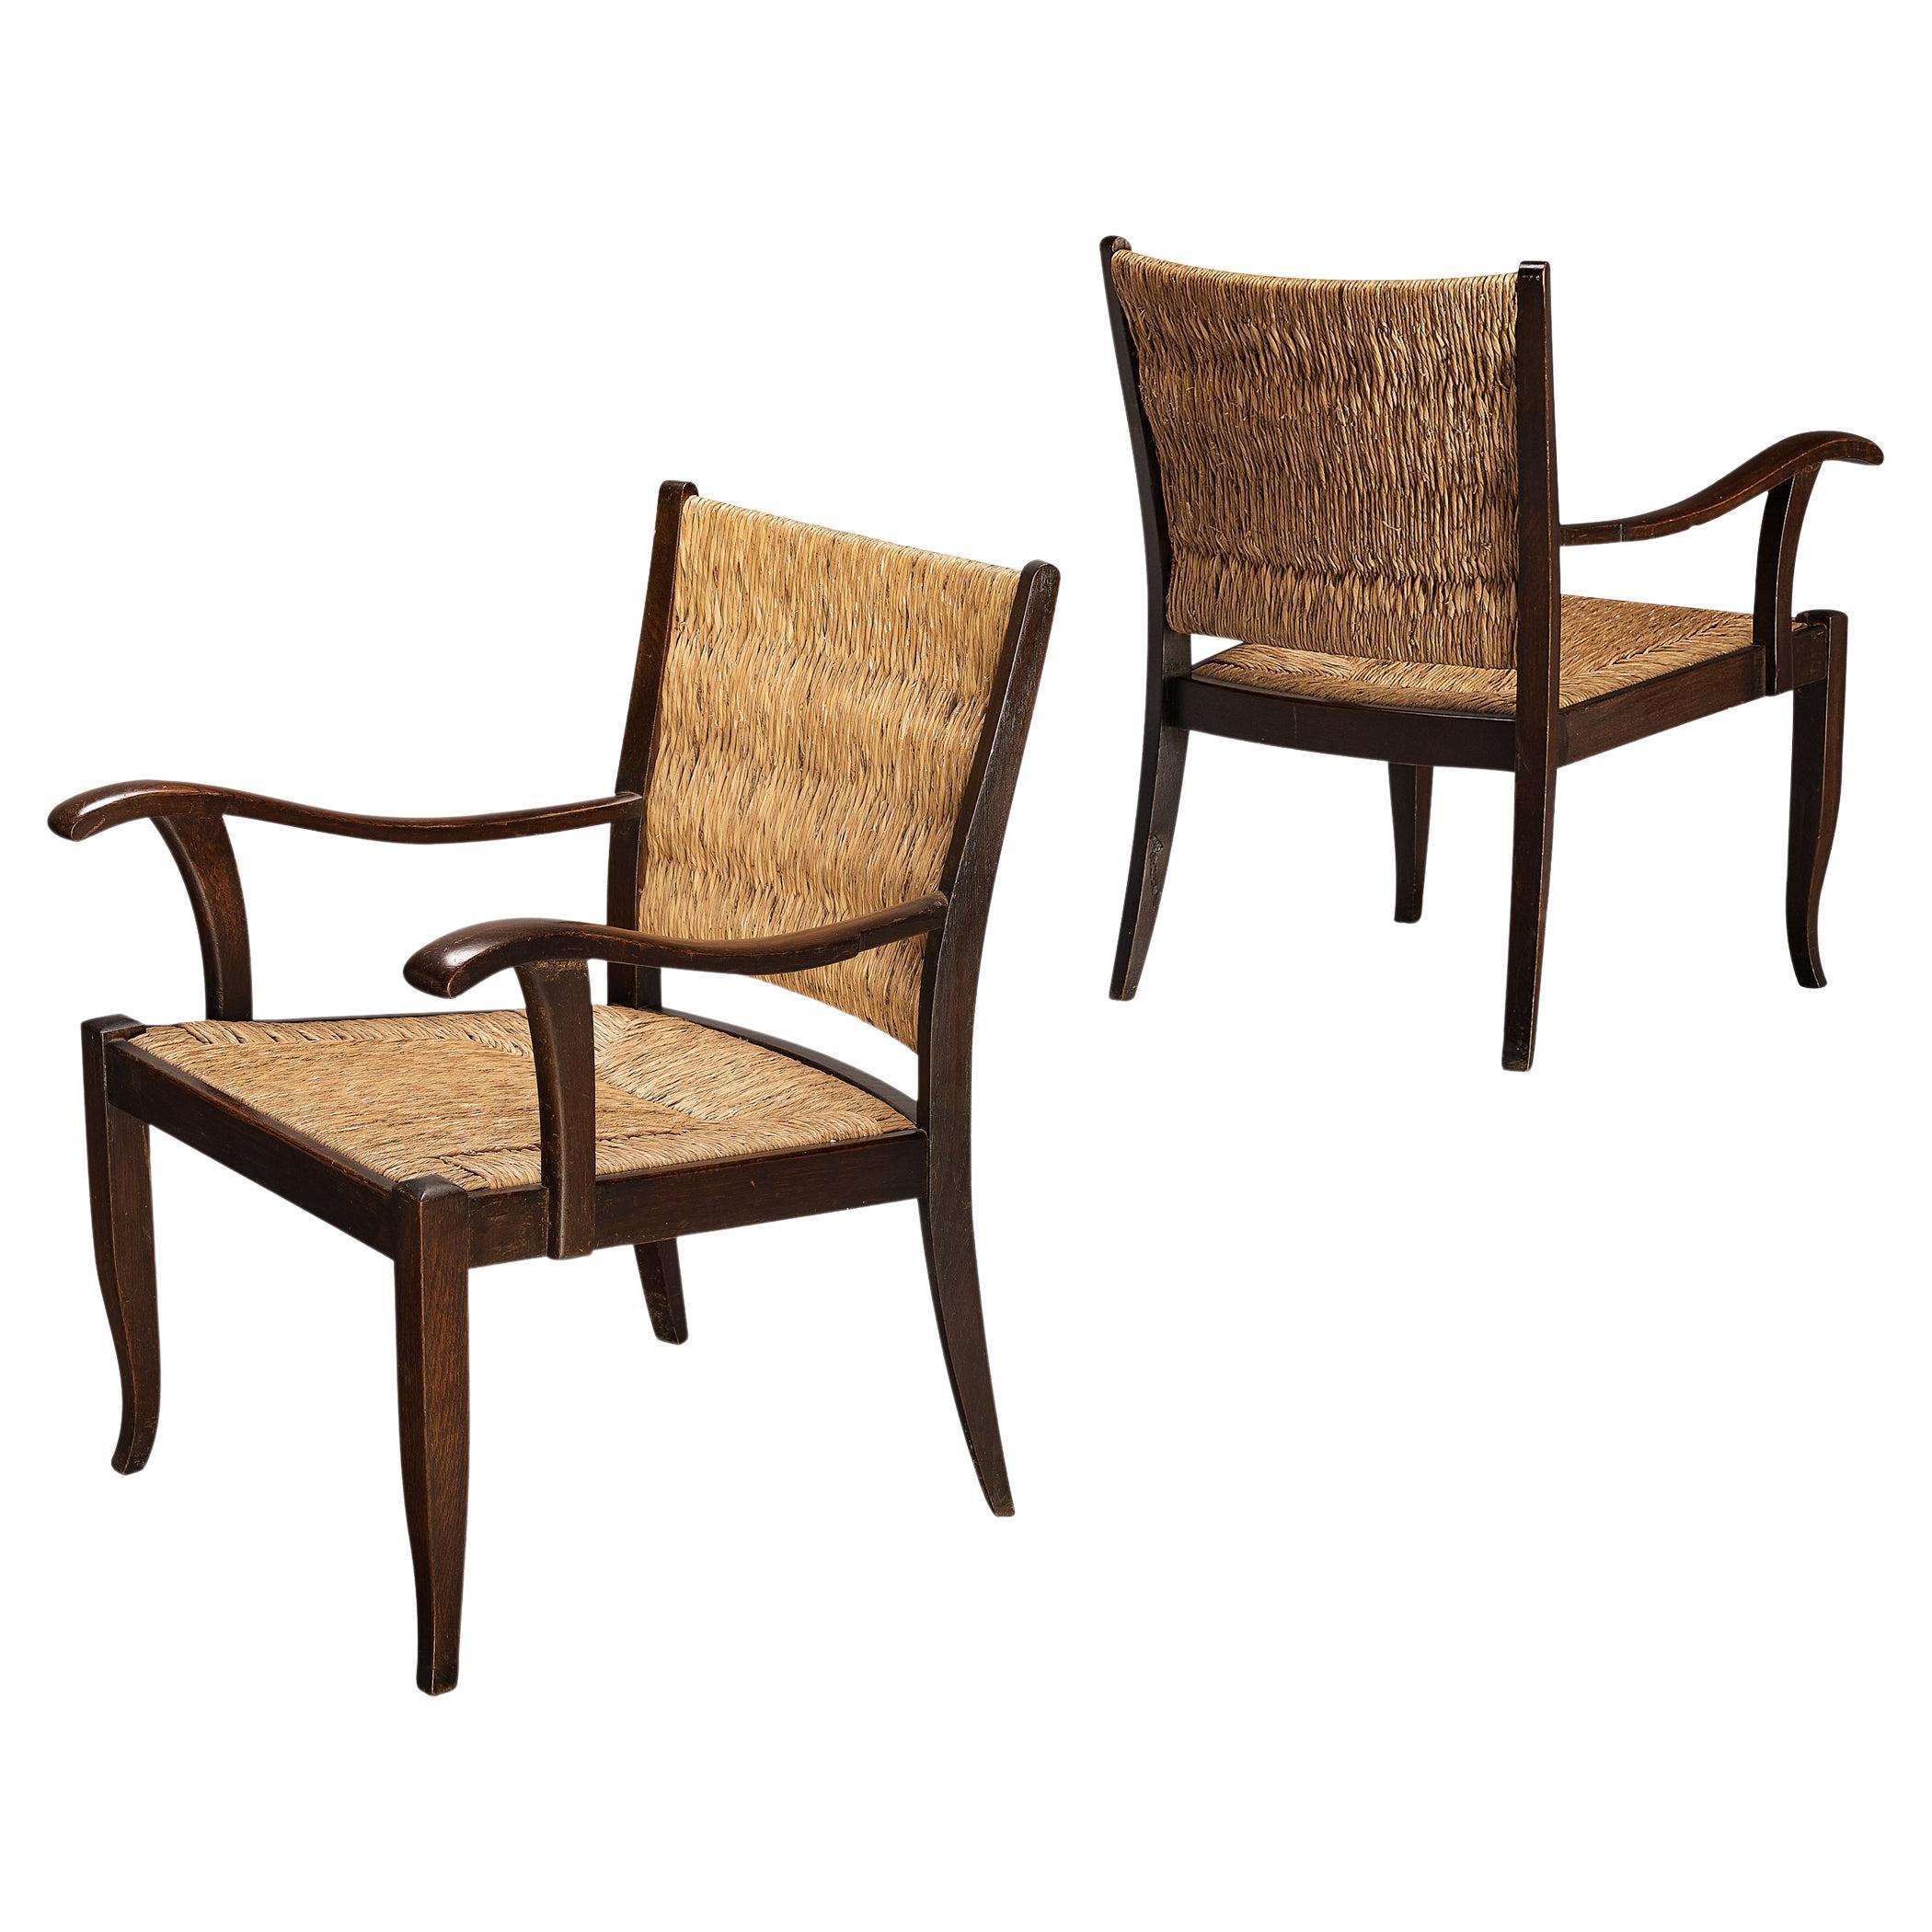 Pair of Lounge Chairs in Straw and Wood 